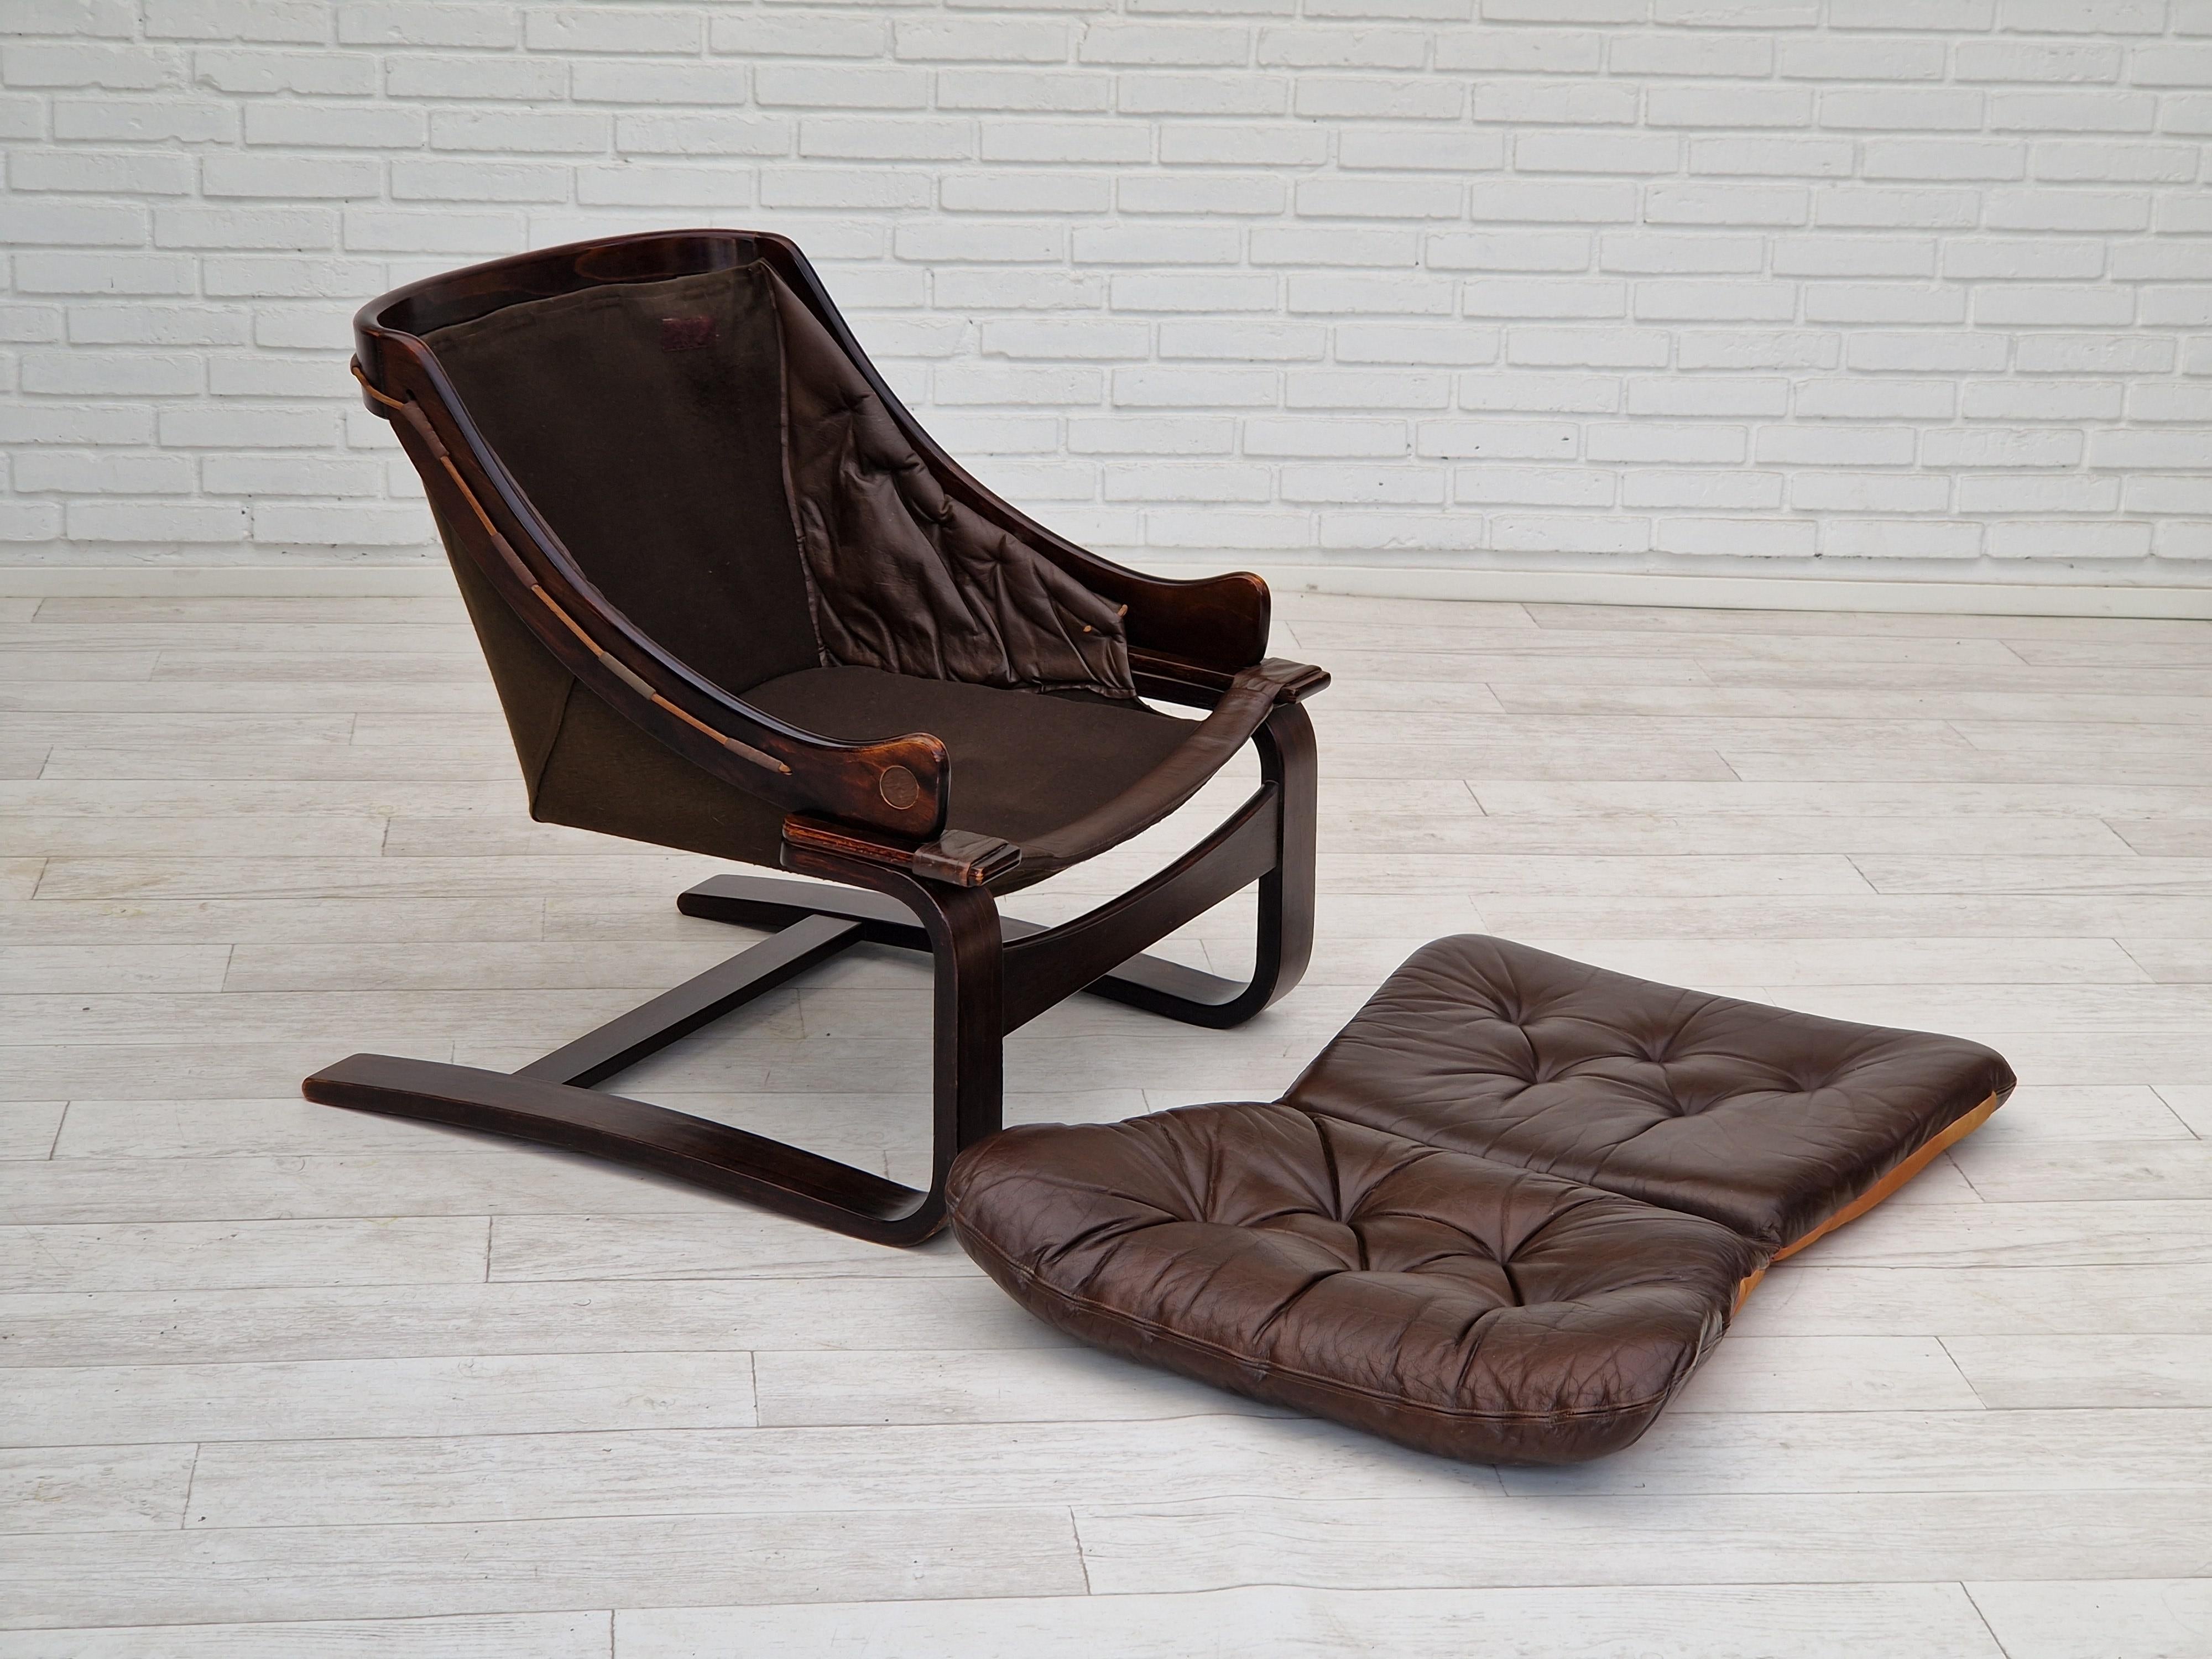 1970s, Brown Leather Lounge Chair by Ake Fribytter for Nelo Sweden For Sale 3